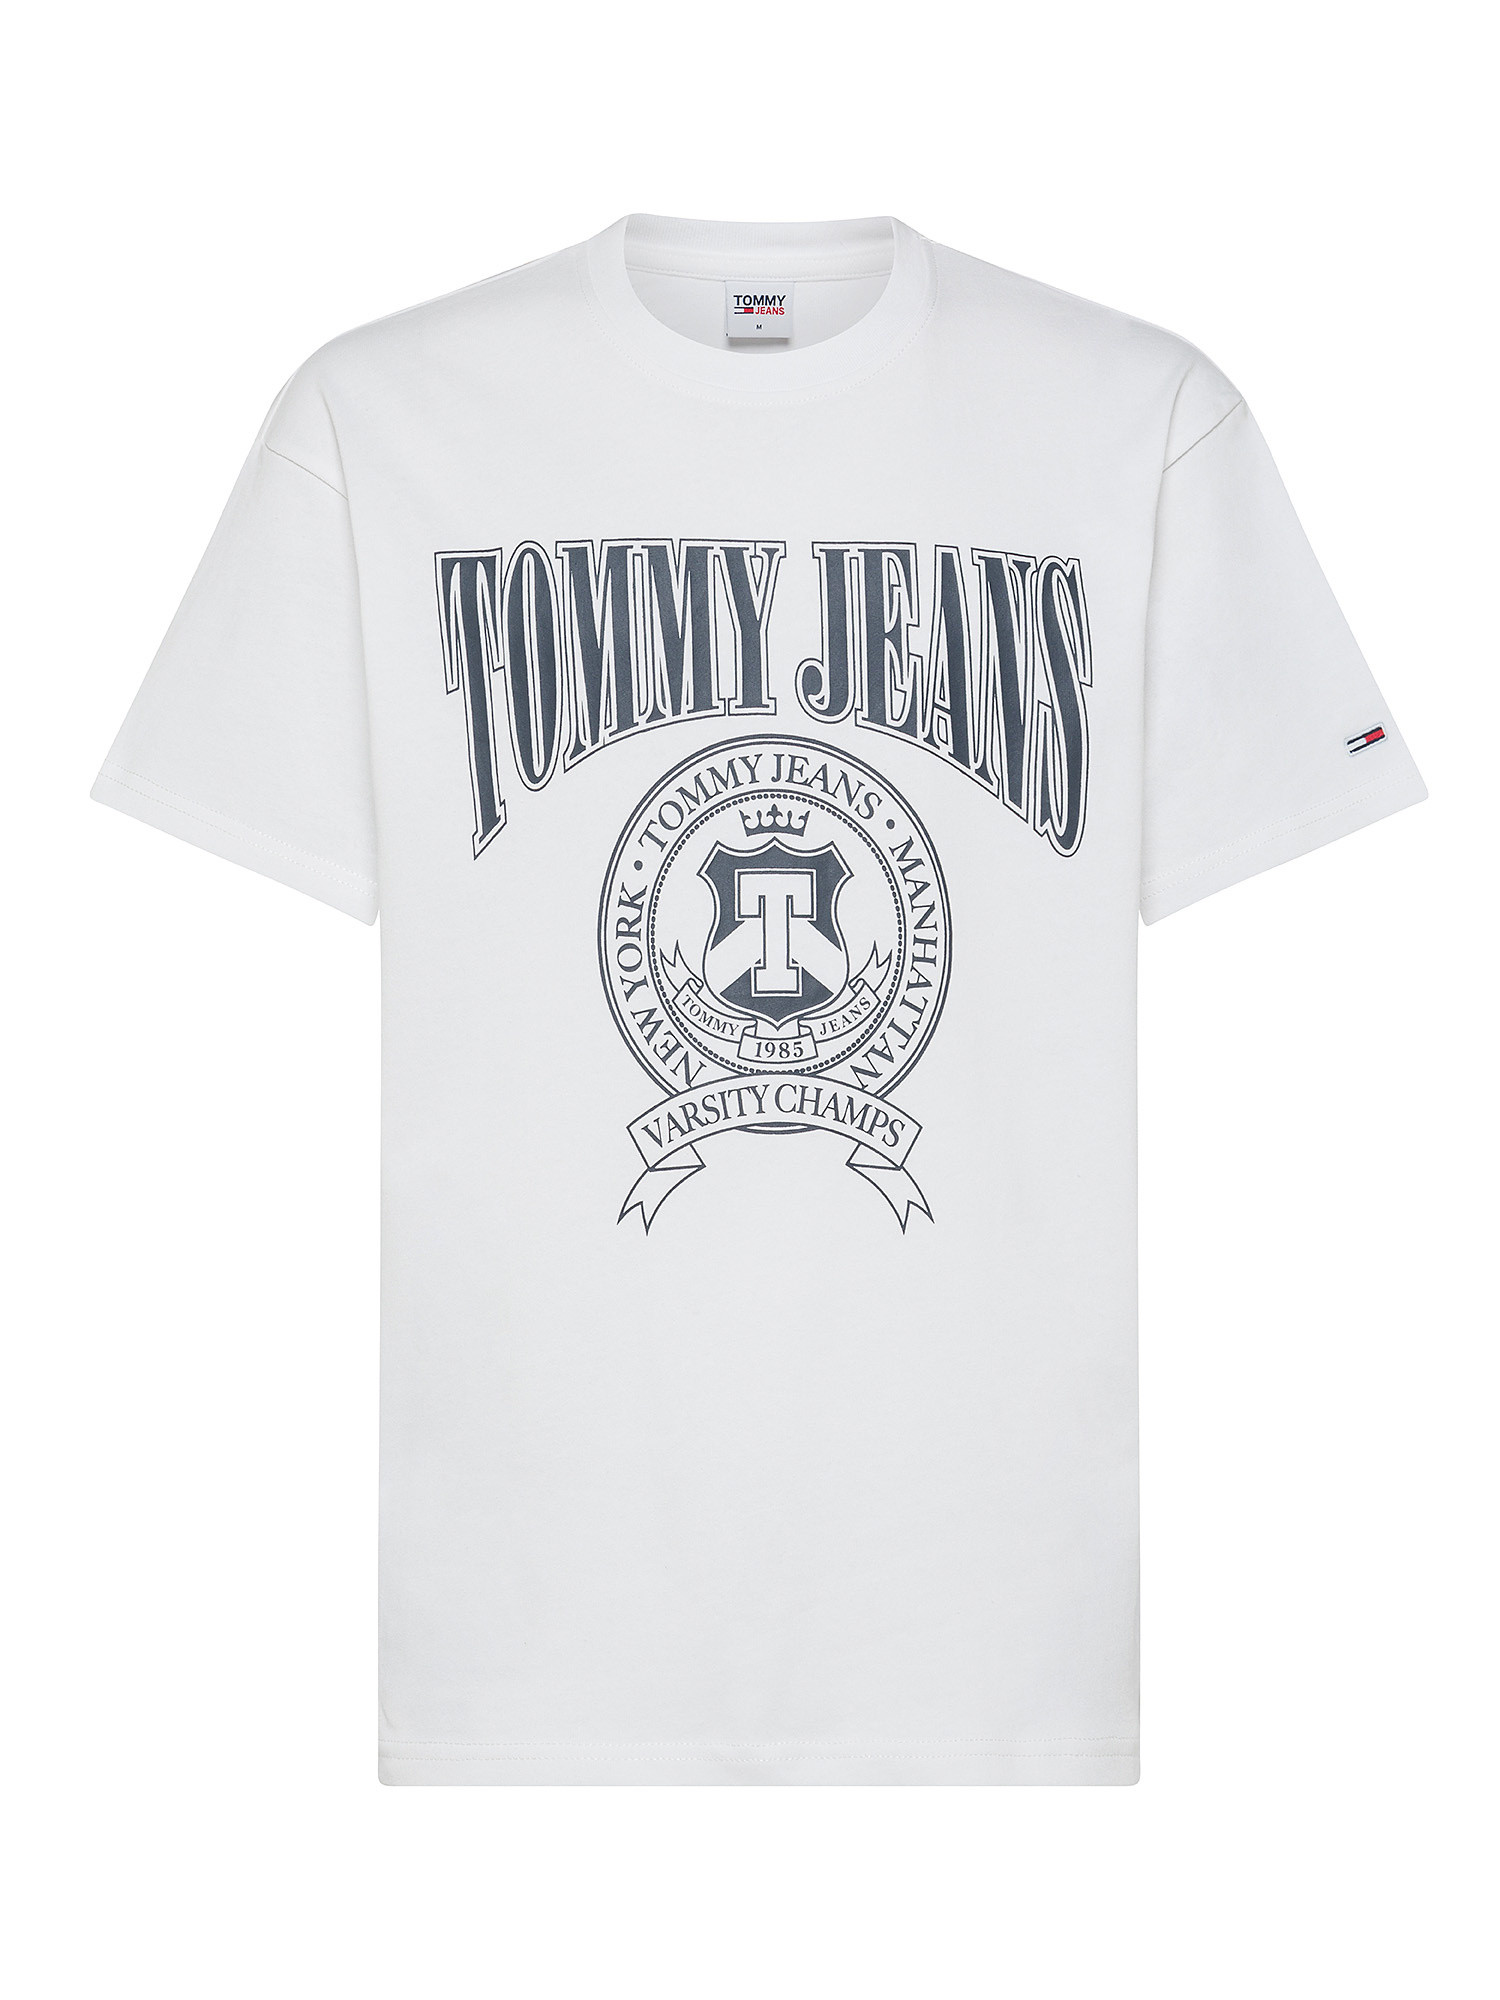 Tommy Jeans - T-shirt girocollo in cotone con stampa e logo, Bianco, large image number 0